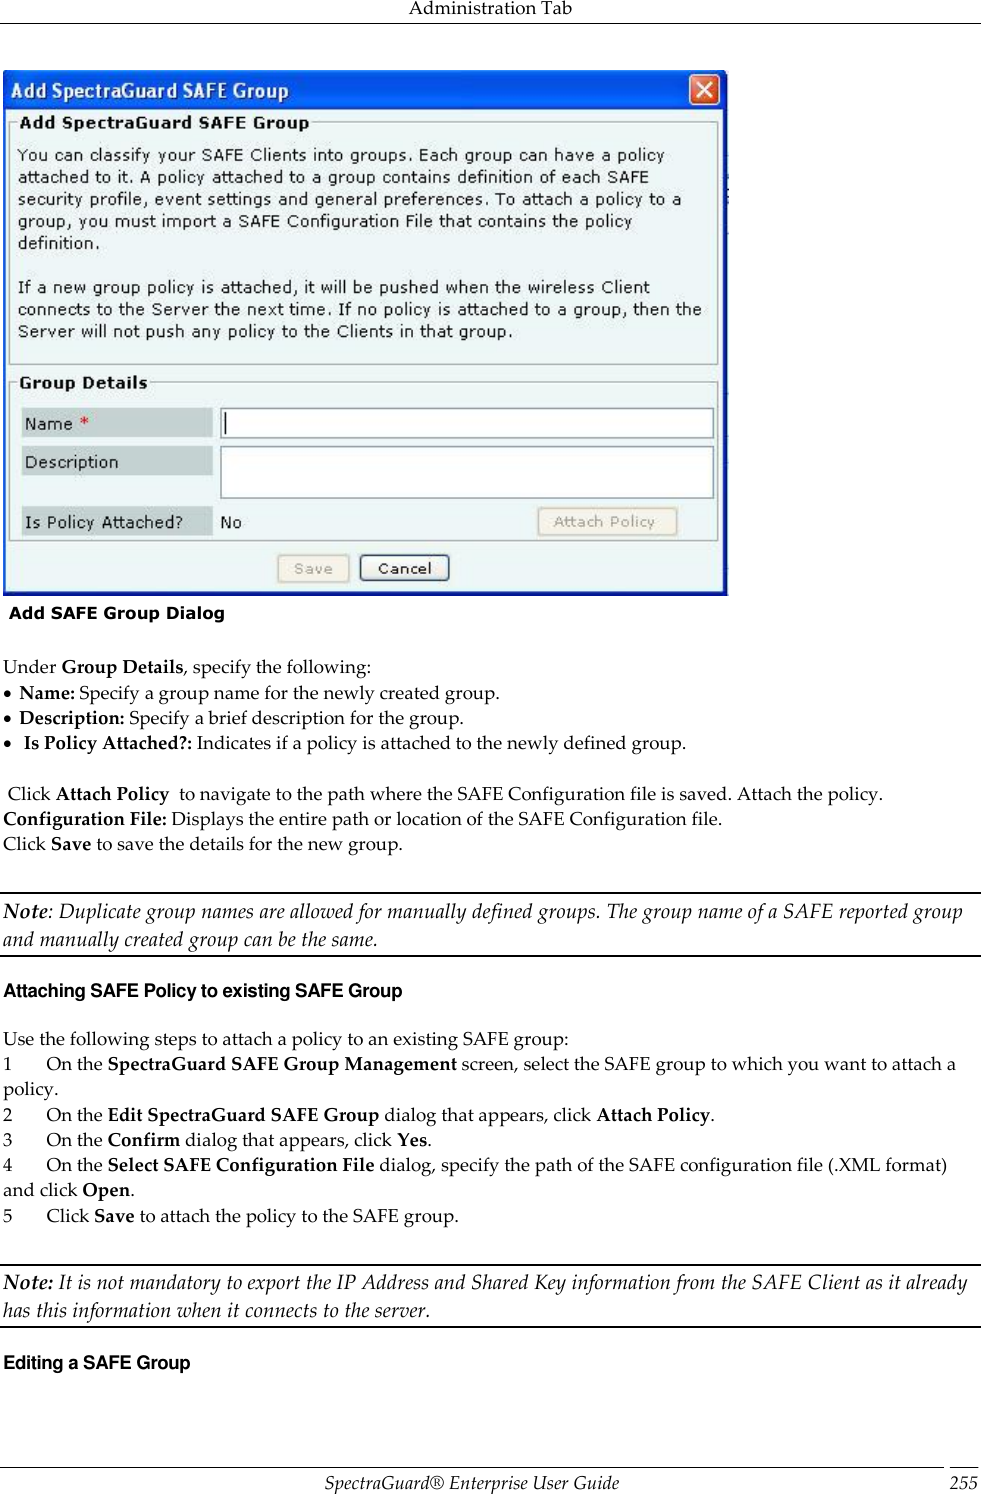 Administration Tab SpectraGuard®  Enterprise User Guide 255   Add SAFE Group Dialog   Under Group Details, specify the following:   Name: Specify a group name for the newly created group.   Description: Specify a brief description for the group.    Is Policy Attached?: Indicates if a policy is attached to the newly defined group.    Click Attach Policy  to navigate to the path where the SAFE Configuration file is saved. Attach the policy. Configuration File: Displays the entire path or location of the SAFE Configuration file. Click Save to save the details for the new group.   Note: Duplicate group names are allowed for manually defined groups. The group name of a SAFE reported group and manually created group can be the same. Attaching SAFE Policy to existing SAFE Group Use the following steps to attach a policy to an existing SAFE group: 1         On the SpectraGuard SAFE Group Management screen, select the SAFE group to which you want to attach a policy. 2         On the Edit SpectraGuard SAFE Group dialog that appears, click Attach Policy. 3         On the Confirm dialog that appears, click Yes. 4         On the Select SAFE Configuration File dialog, specify the path of the SAFE configuration file (.XML format) and click Open. 5         Click Save to attach the policy to the SAFE group.   Note: It is not mandatory to export the IP Address and Shared Key information from the SAFE Client as it already has this information when it connects to the server. Editing a SAFE Group 